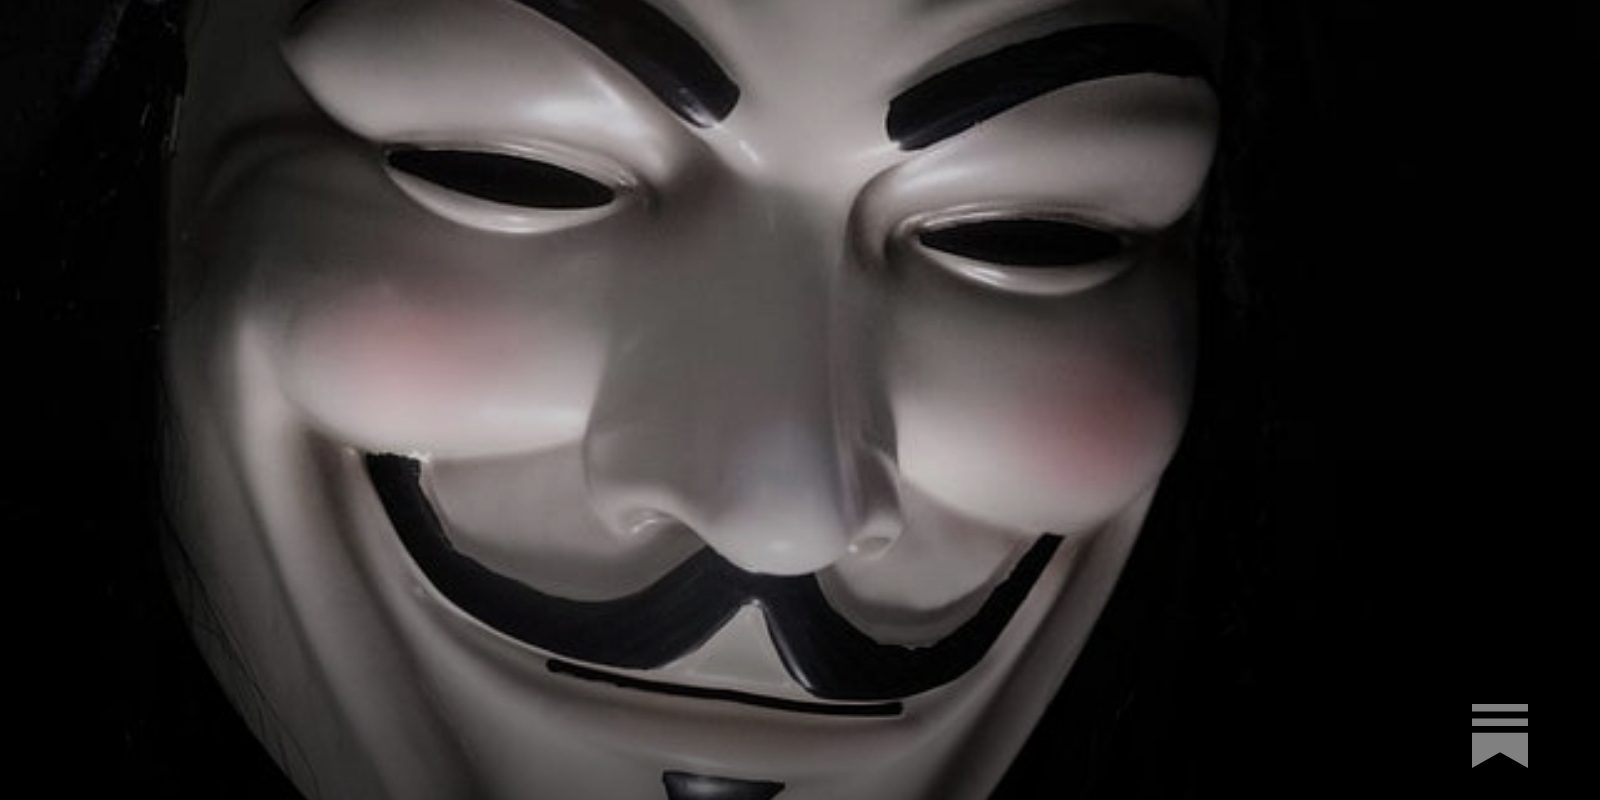 The anonymity strategy - The Face